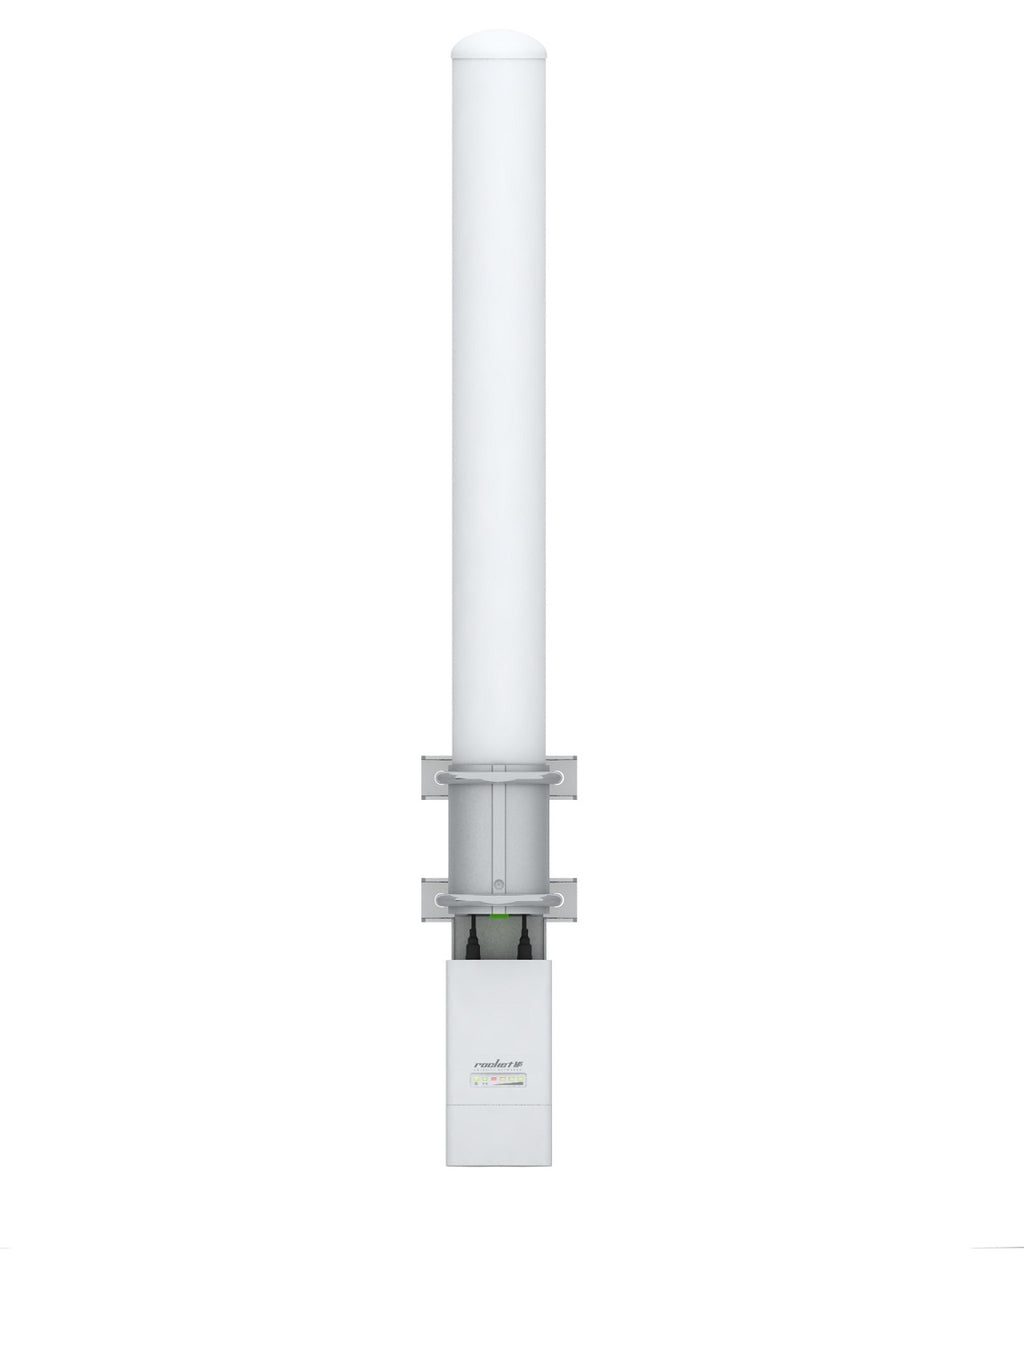 Ubiquiti 5GHz AirMax Dual Omni directional 13dBi Antenna - All mounting accessories and brackets included-0